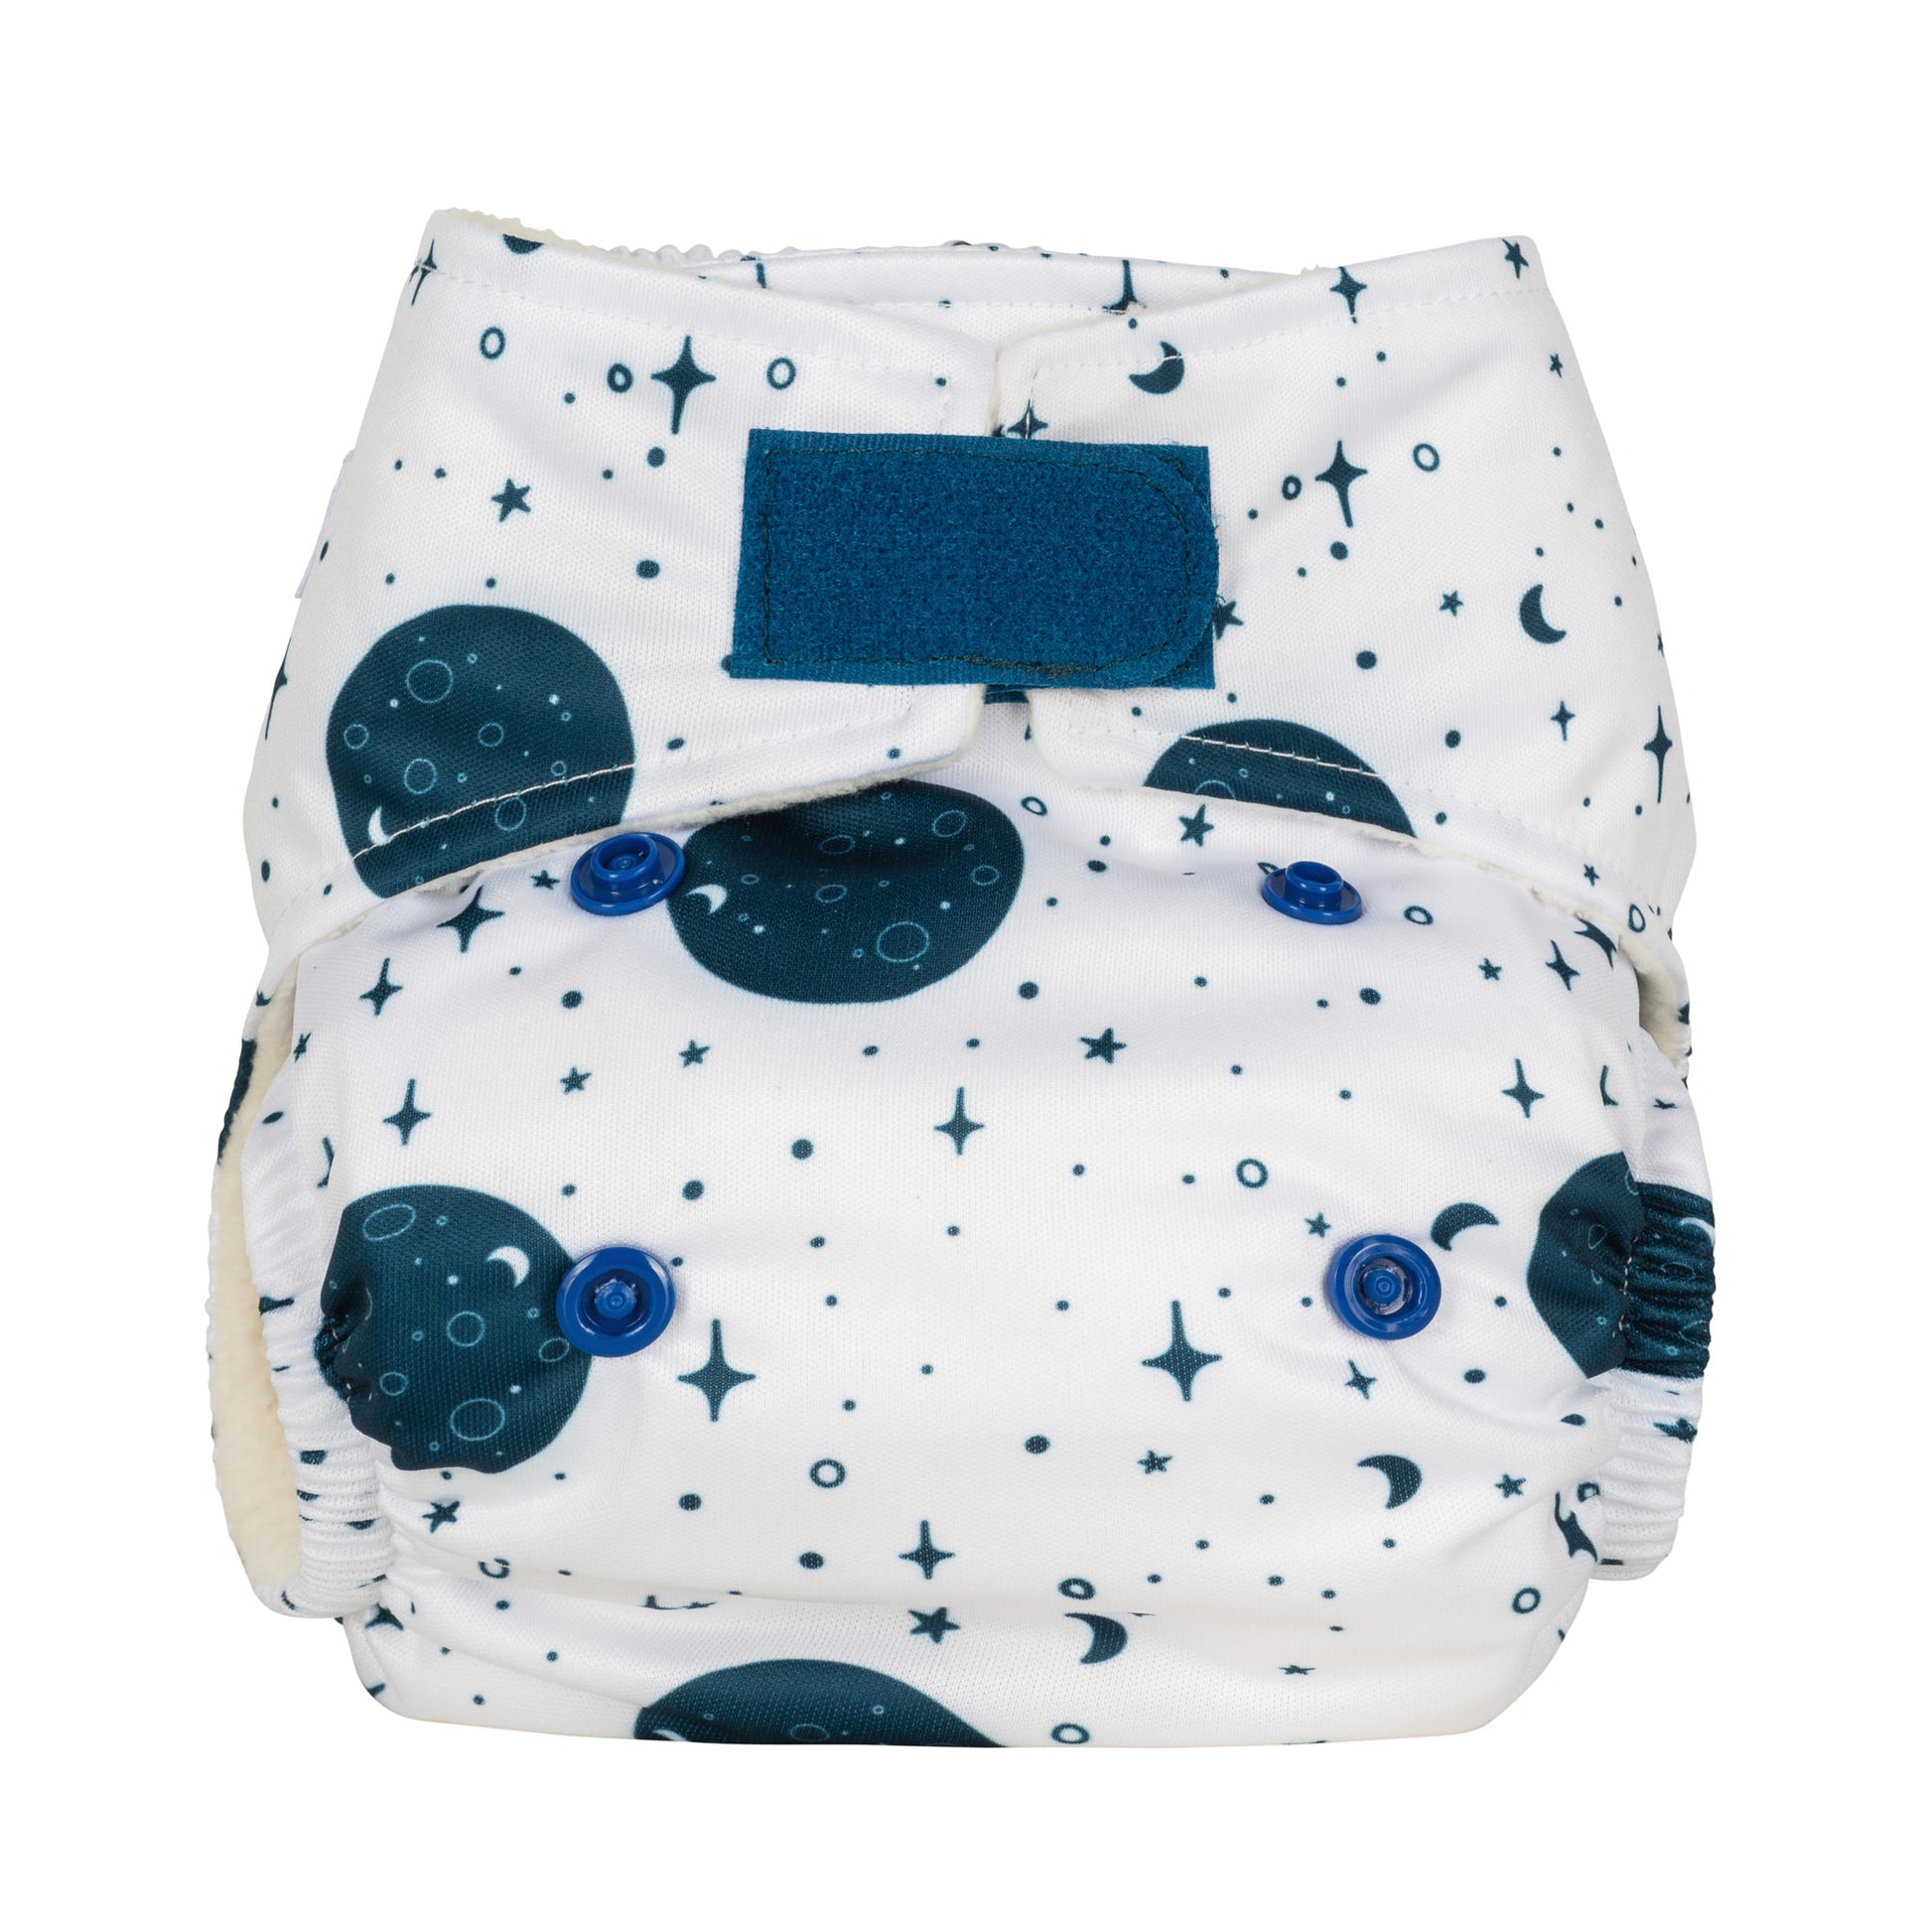 A newborn size reusable cloth nappy with a white background and dark blue moon and stars print. It also features a velcro fastening. 